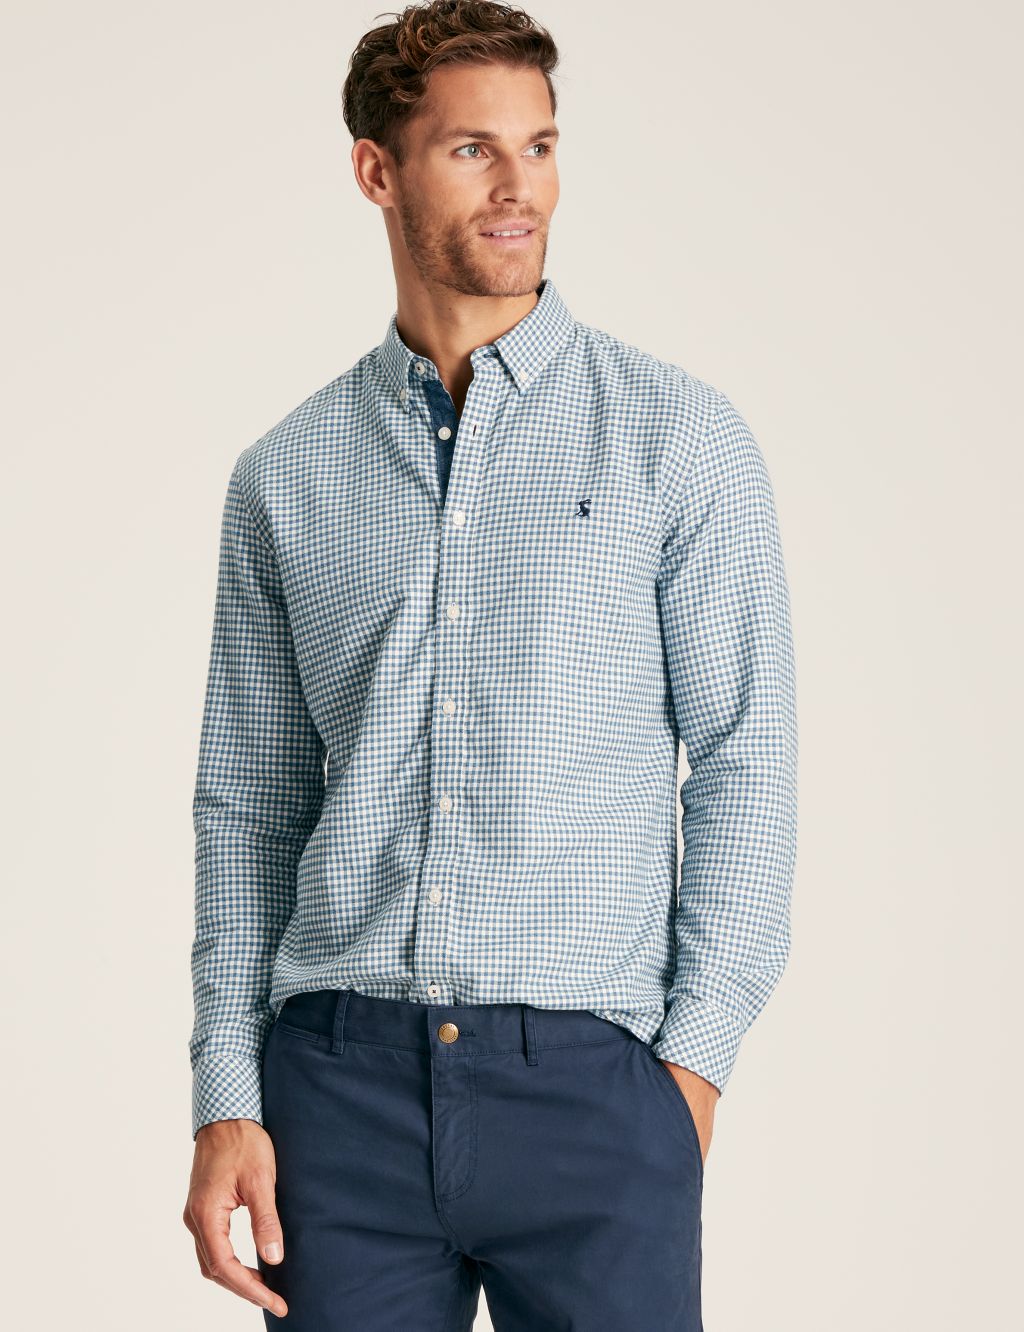 Brushed Cotton Gingham Check Oxford Shirt